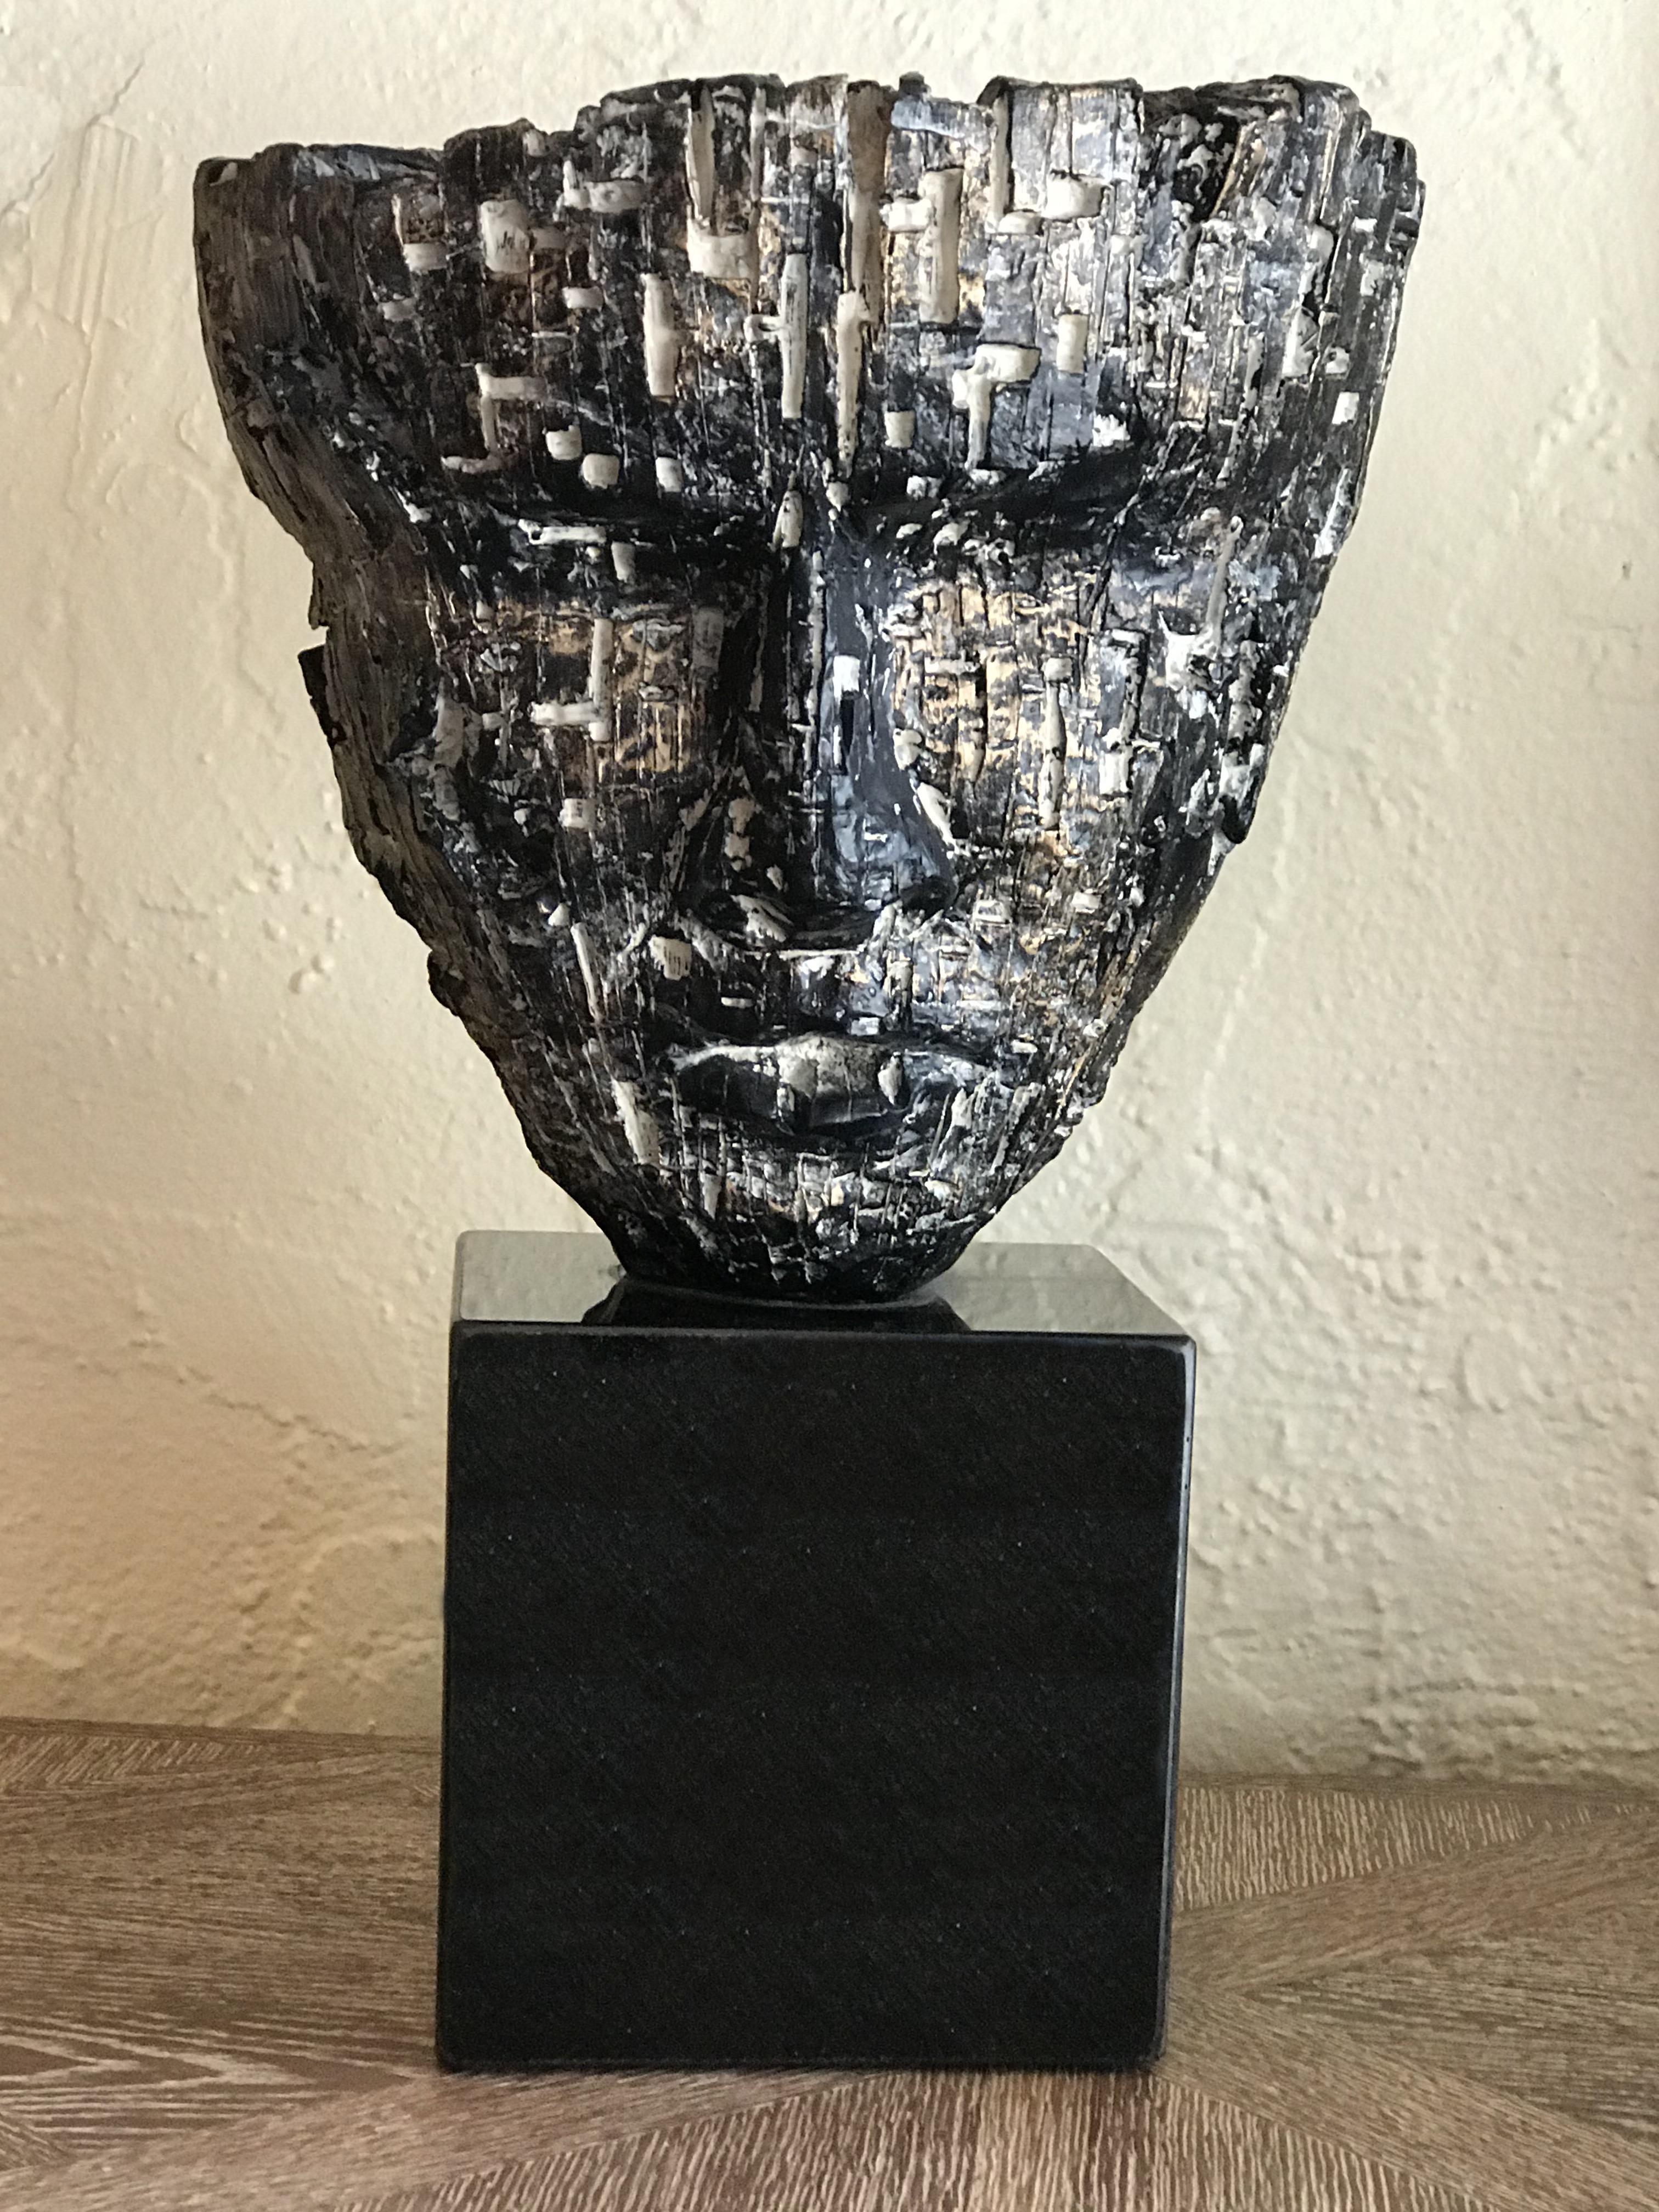 Interesting and unusual sculpture of a 3 faces made of resin and resting on a black marble base. 
Dimensions of the base: 7.8